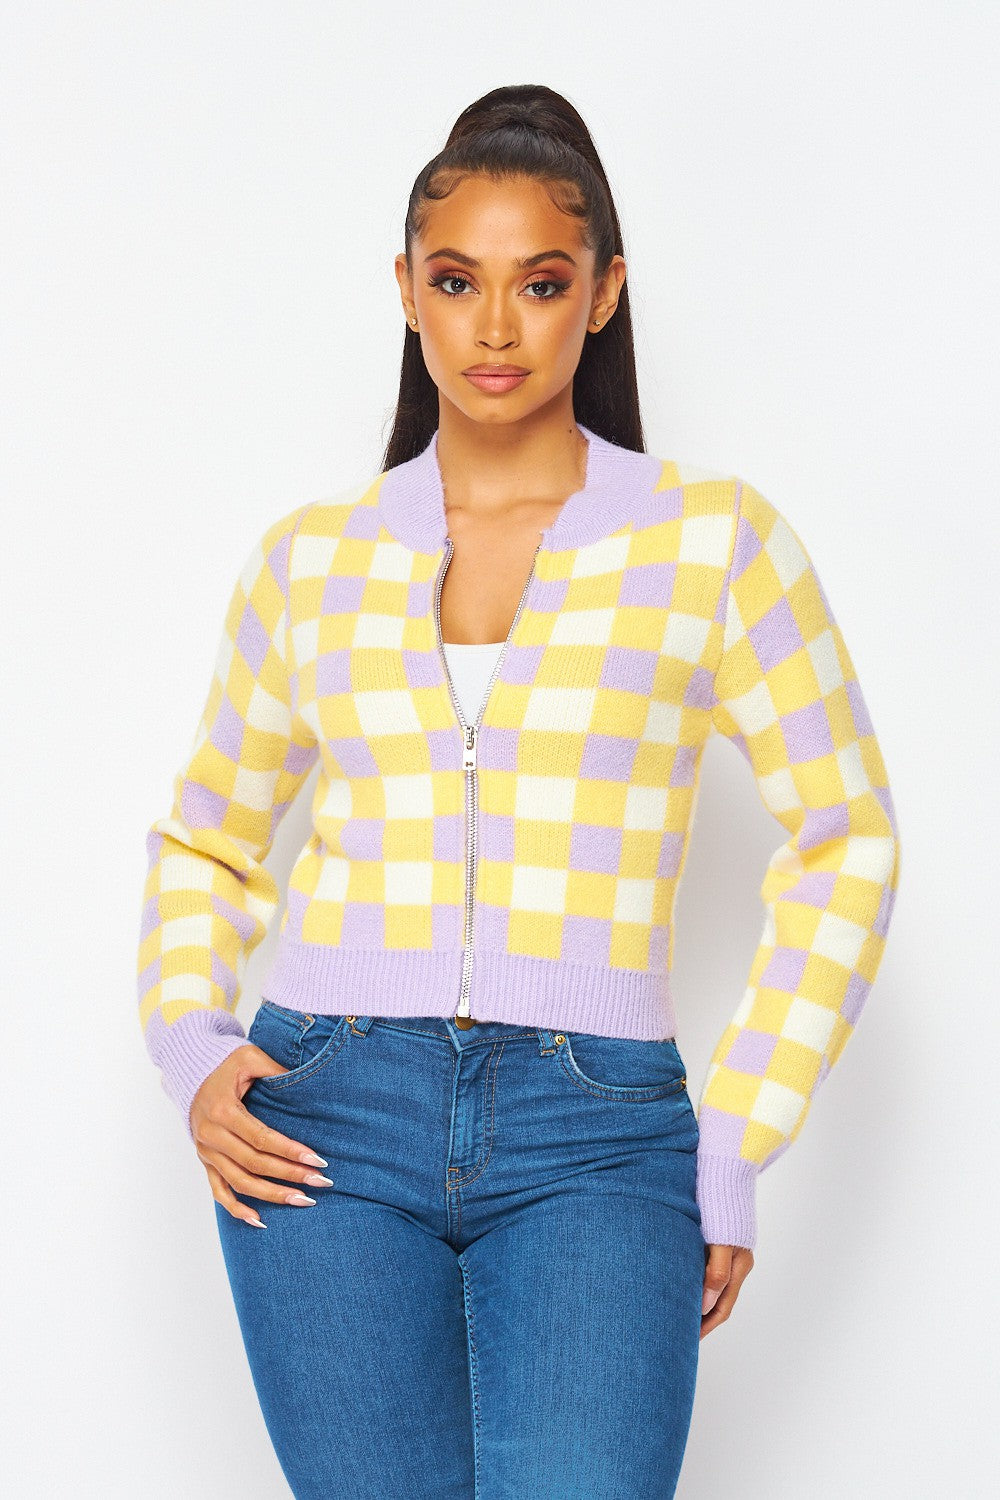 Amal Multi Color Checkered Zip Up Cardigan Sweater